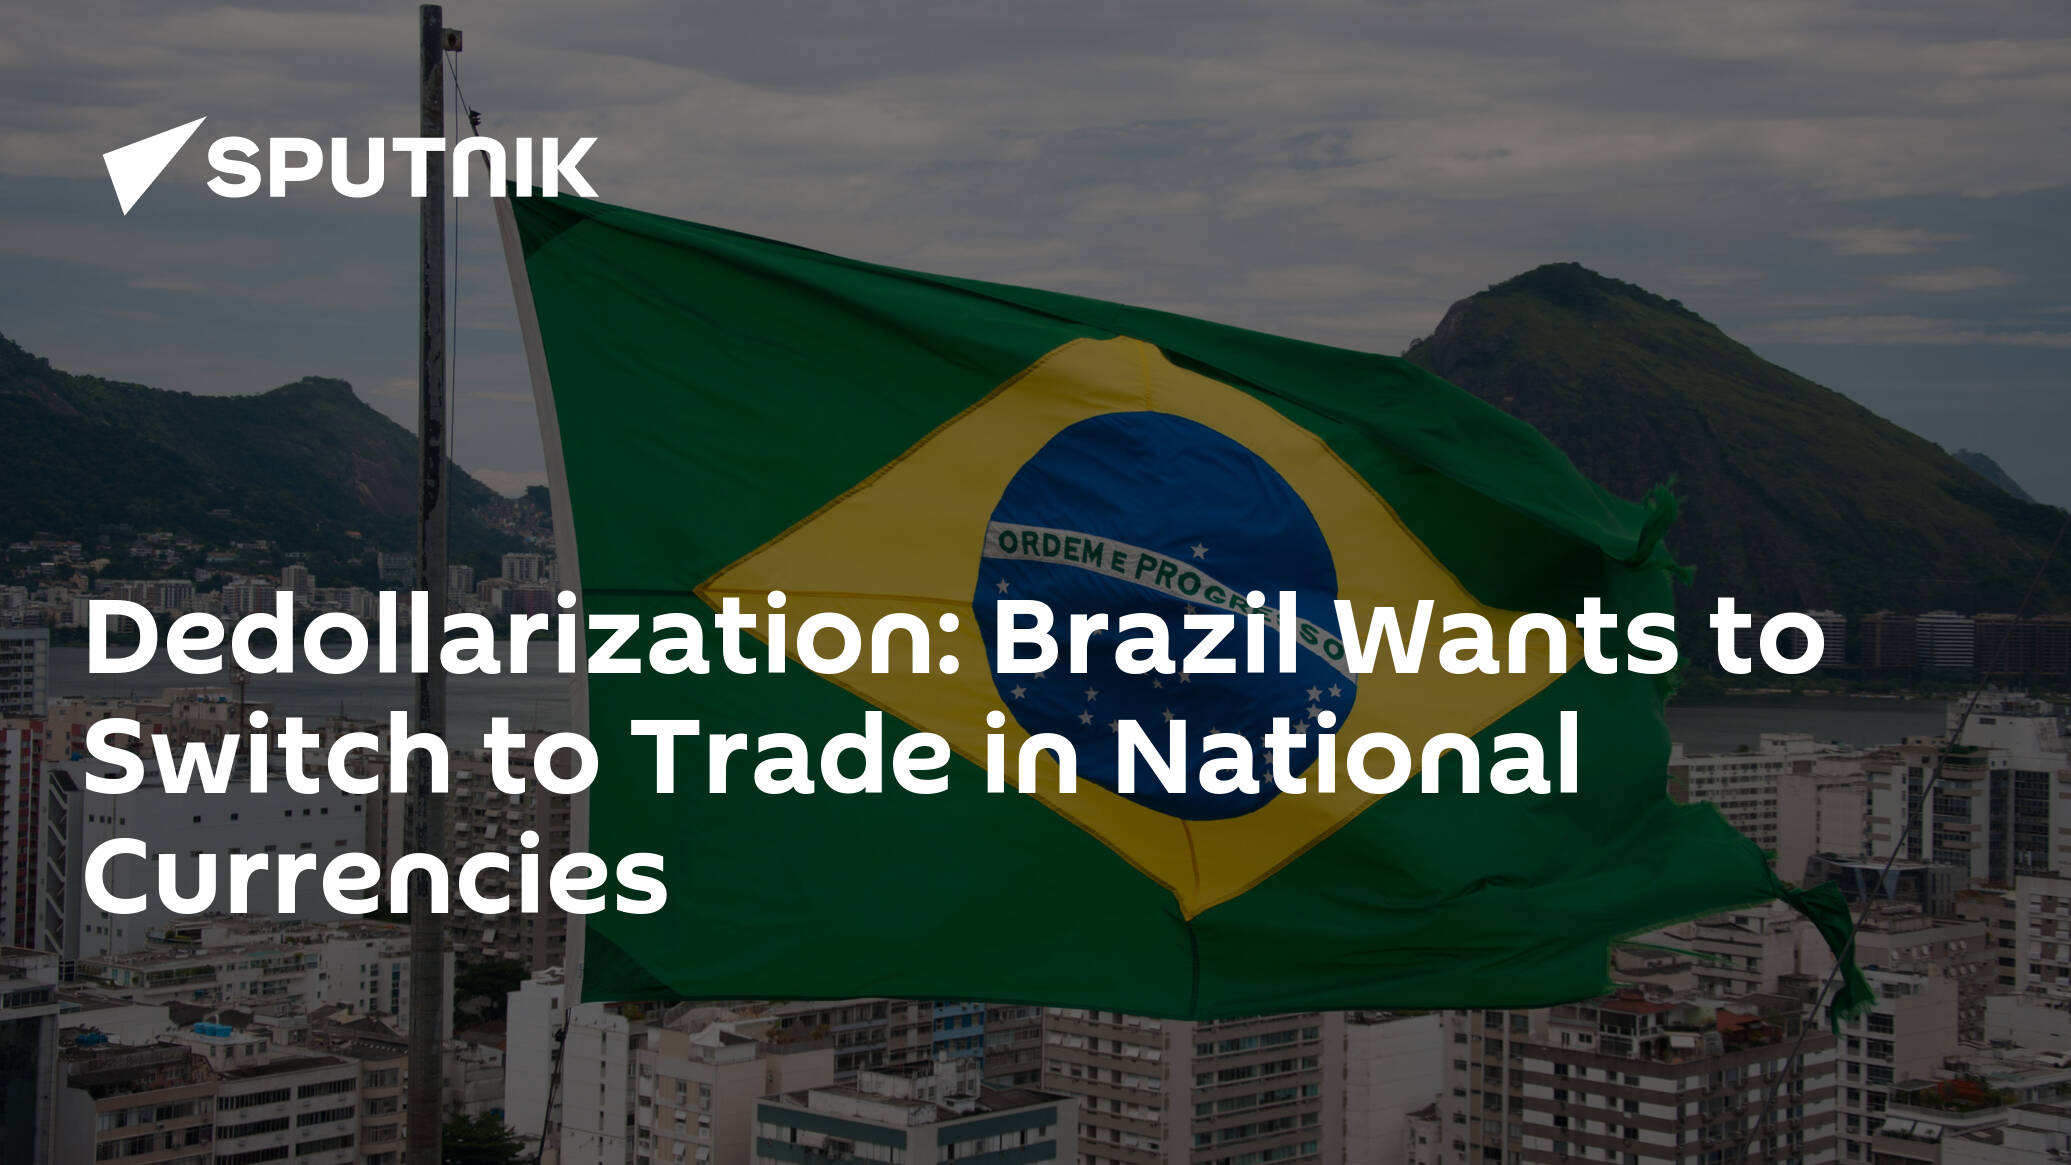 Dedollarization: Brazil Wants to Switch to Trade in National Currencies